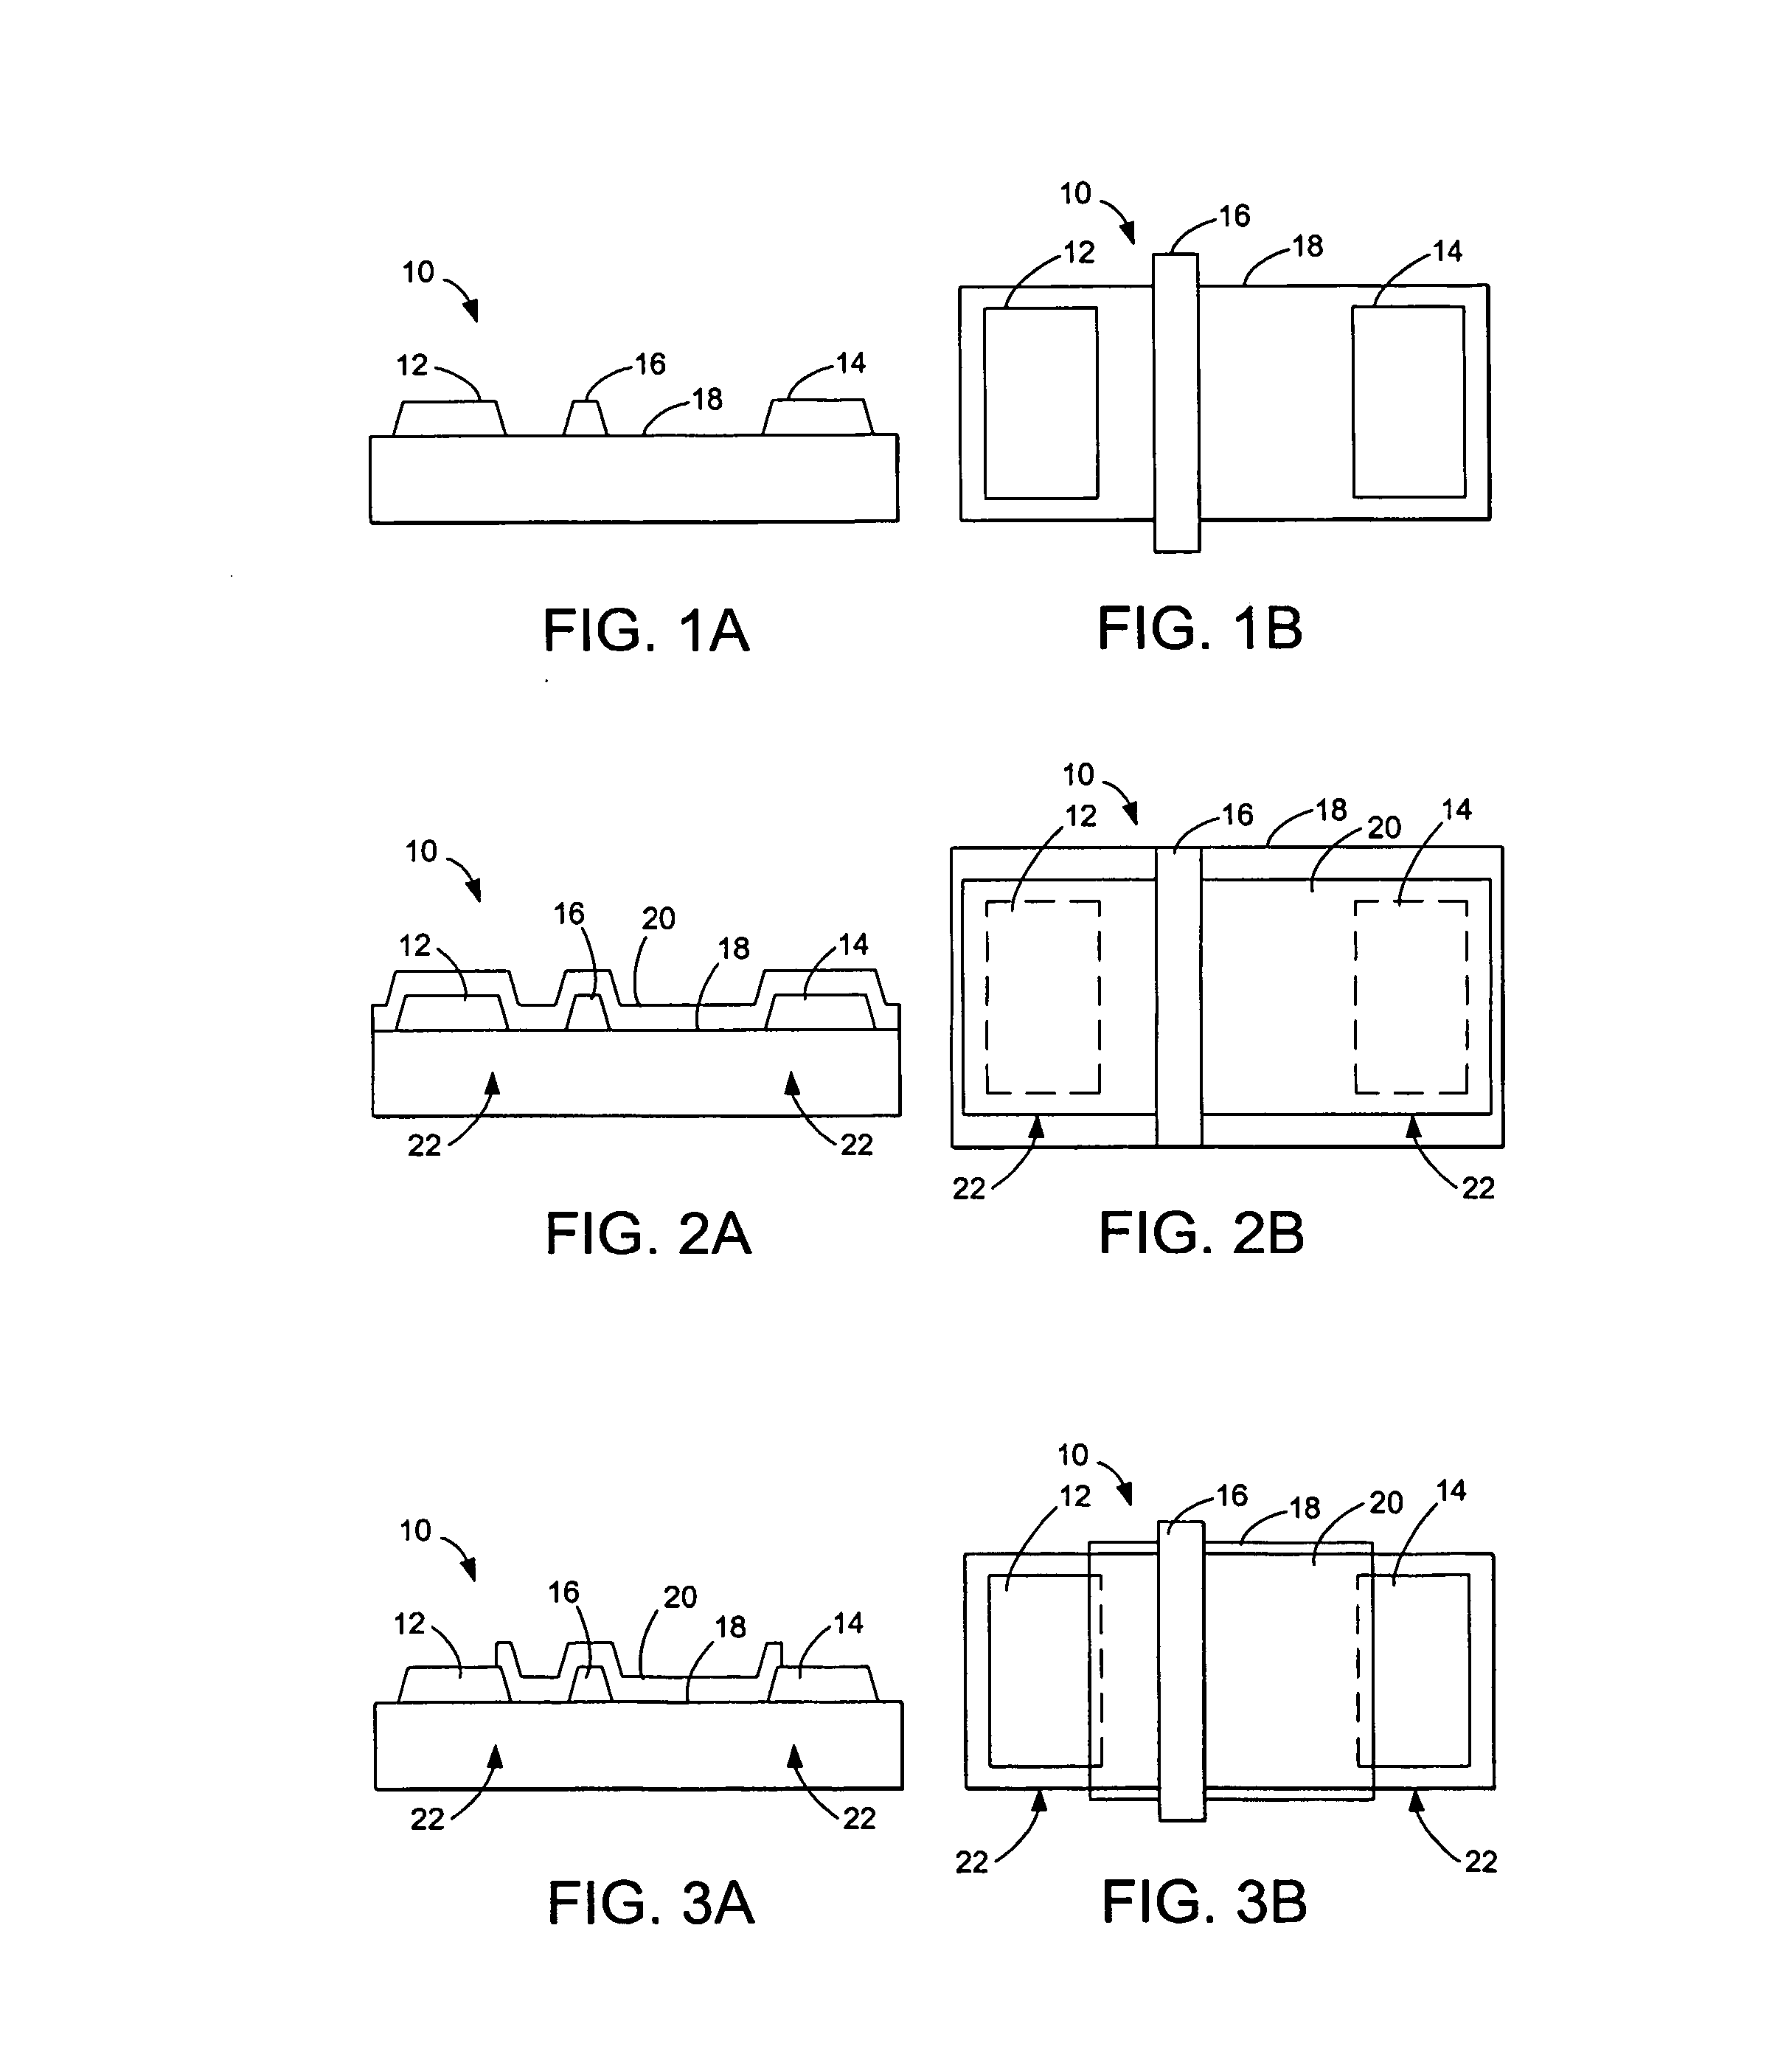 Fabrication of single or multiple gate field plates